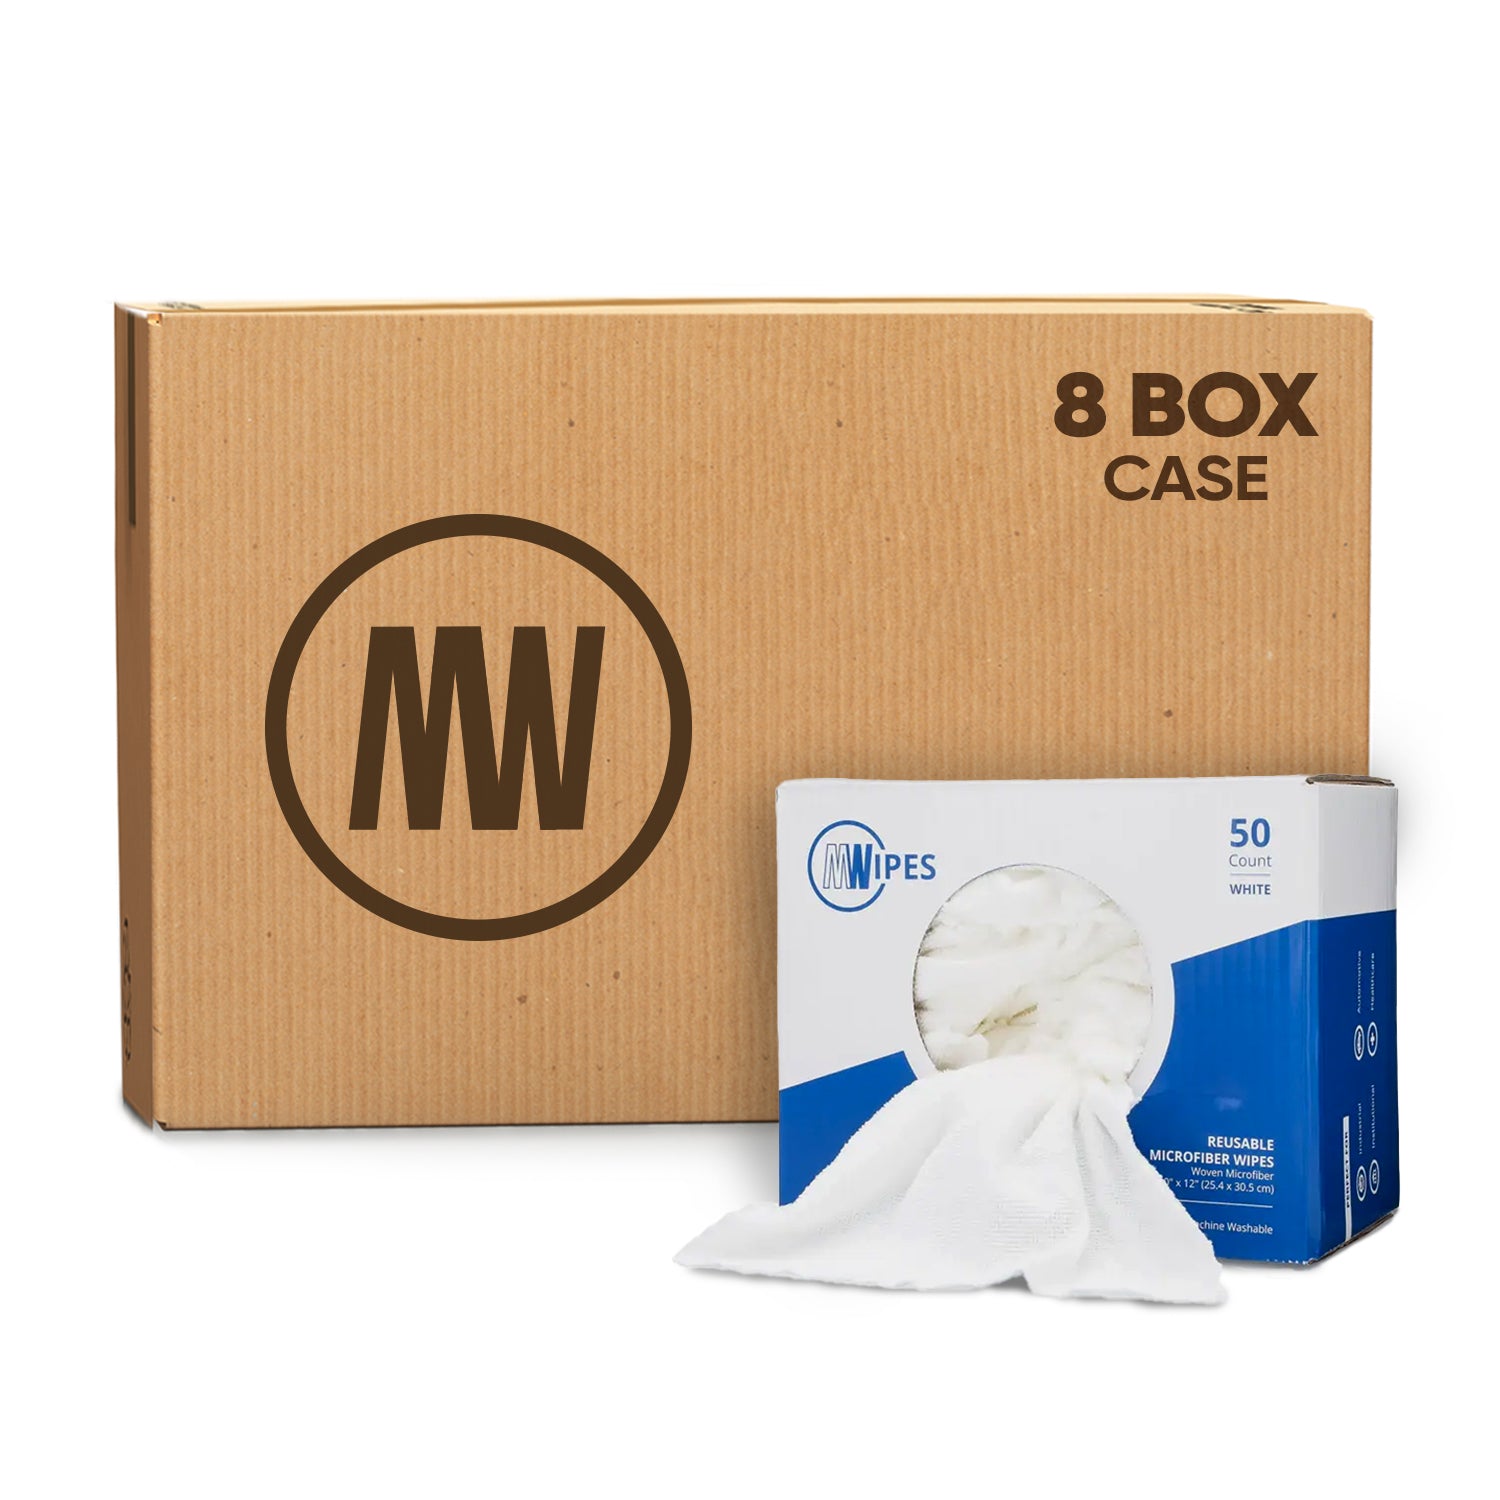 MWipes Reusable Microfiber Wipes - Box of 50 - 10"x12" - Blue - Case of 8